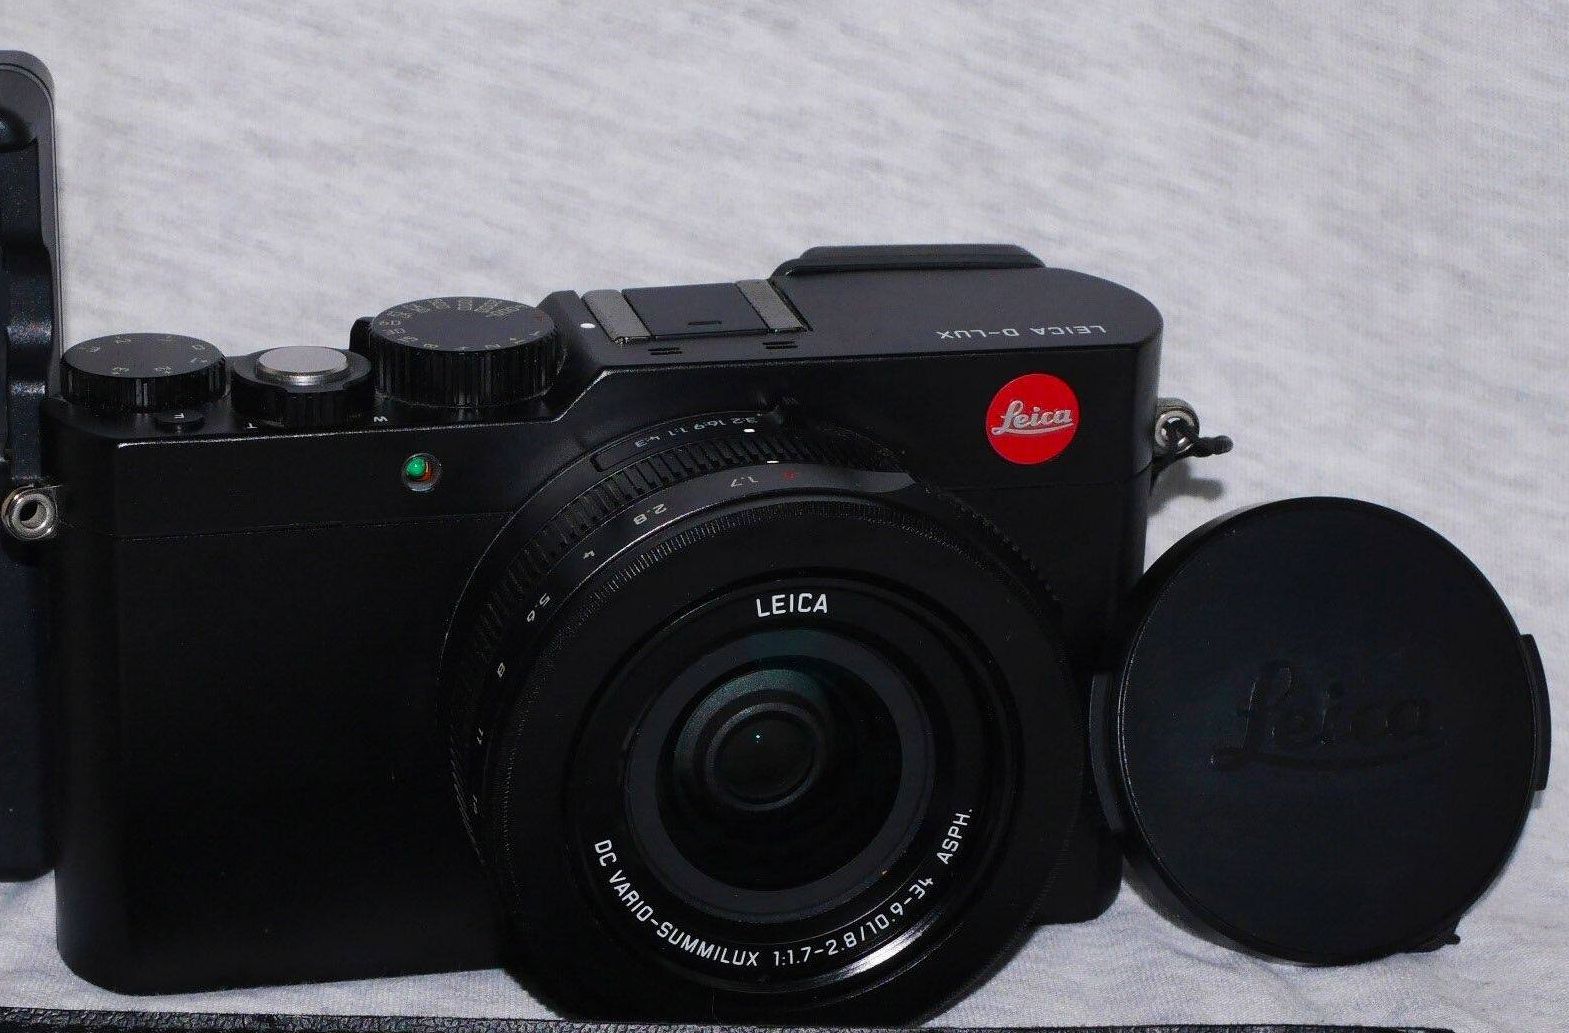 Leica D-LUX (Typ 109) Digital Camera Deluxe Kit B&H Photo Video